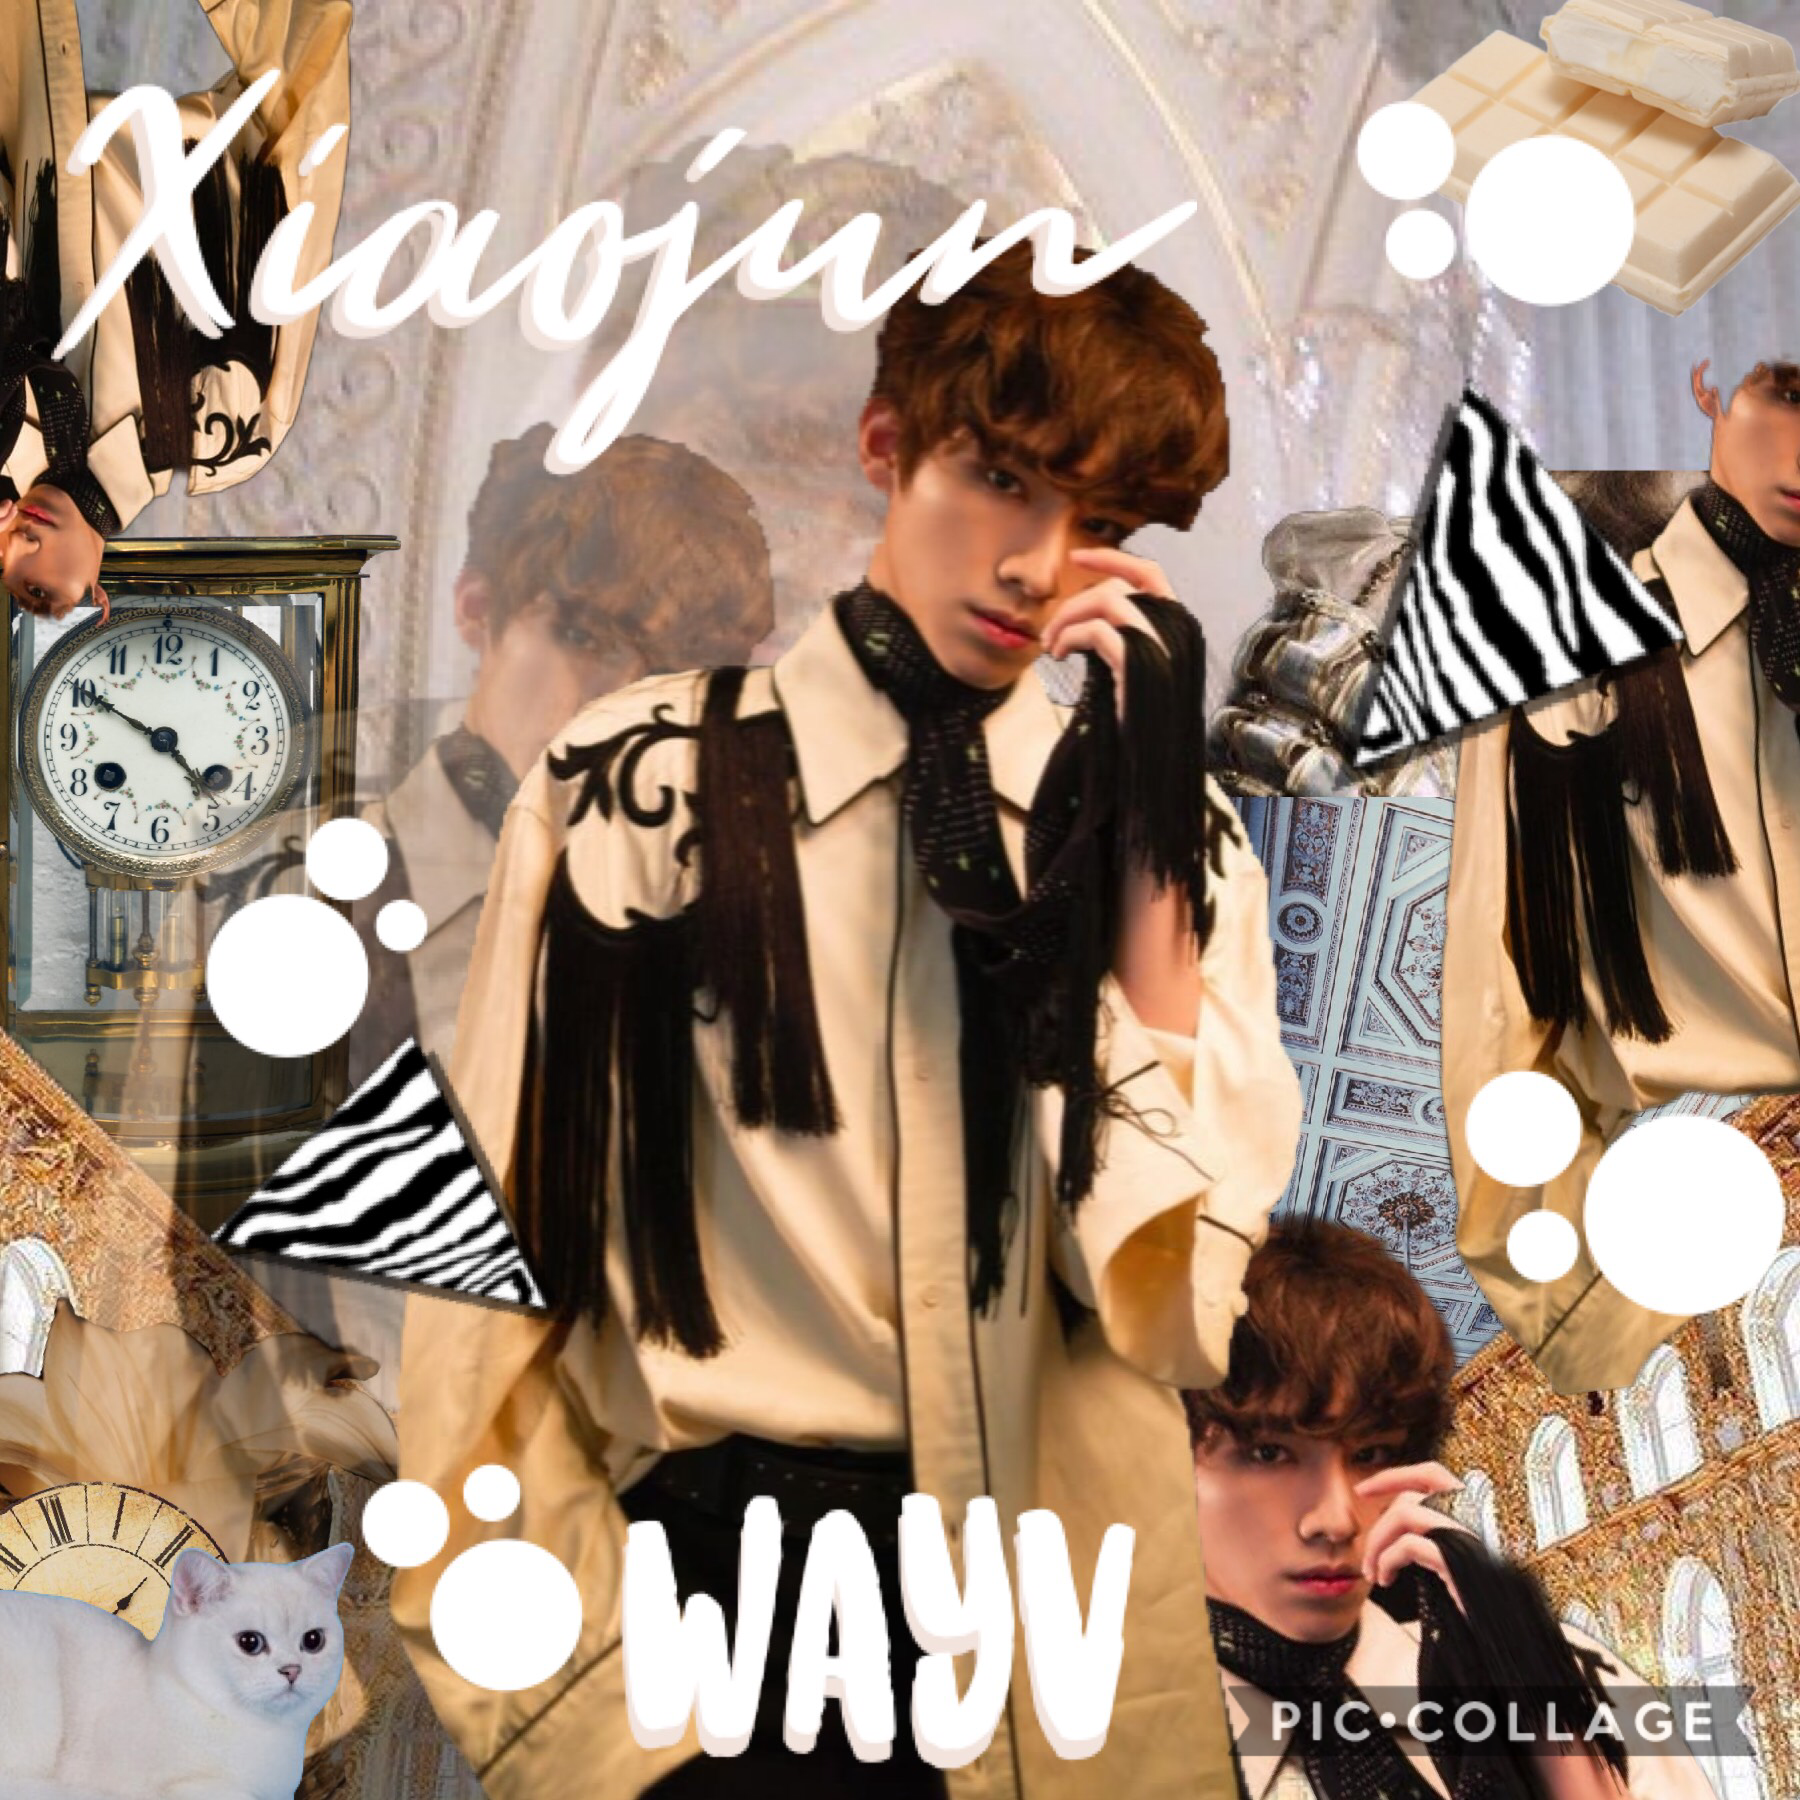 🌊ｗａｙｖ (tap)
~Requested by my friend Julia (irl) :)
sOoOo I unstaned bts and blackpink...
Also OMLLLLLL CROWN (TXT) KILLED MEEEEE Hueningkai is just 💓💗💕💓💕💞 oml (he speaks my first language I’m happyyyy) he’s such a cute baby <33 not my bias tho
Well NO SCH